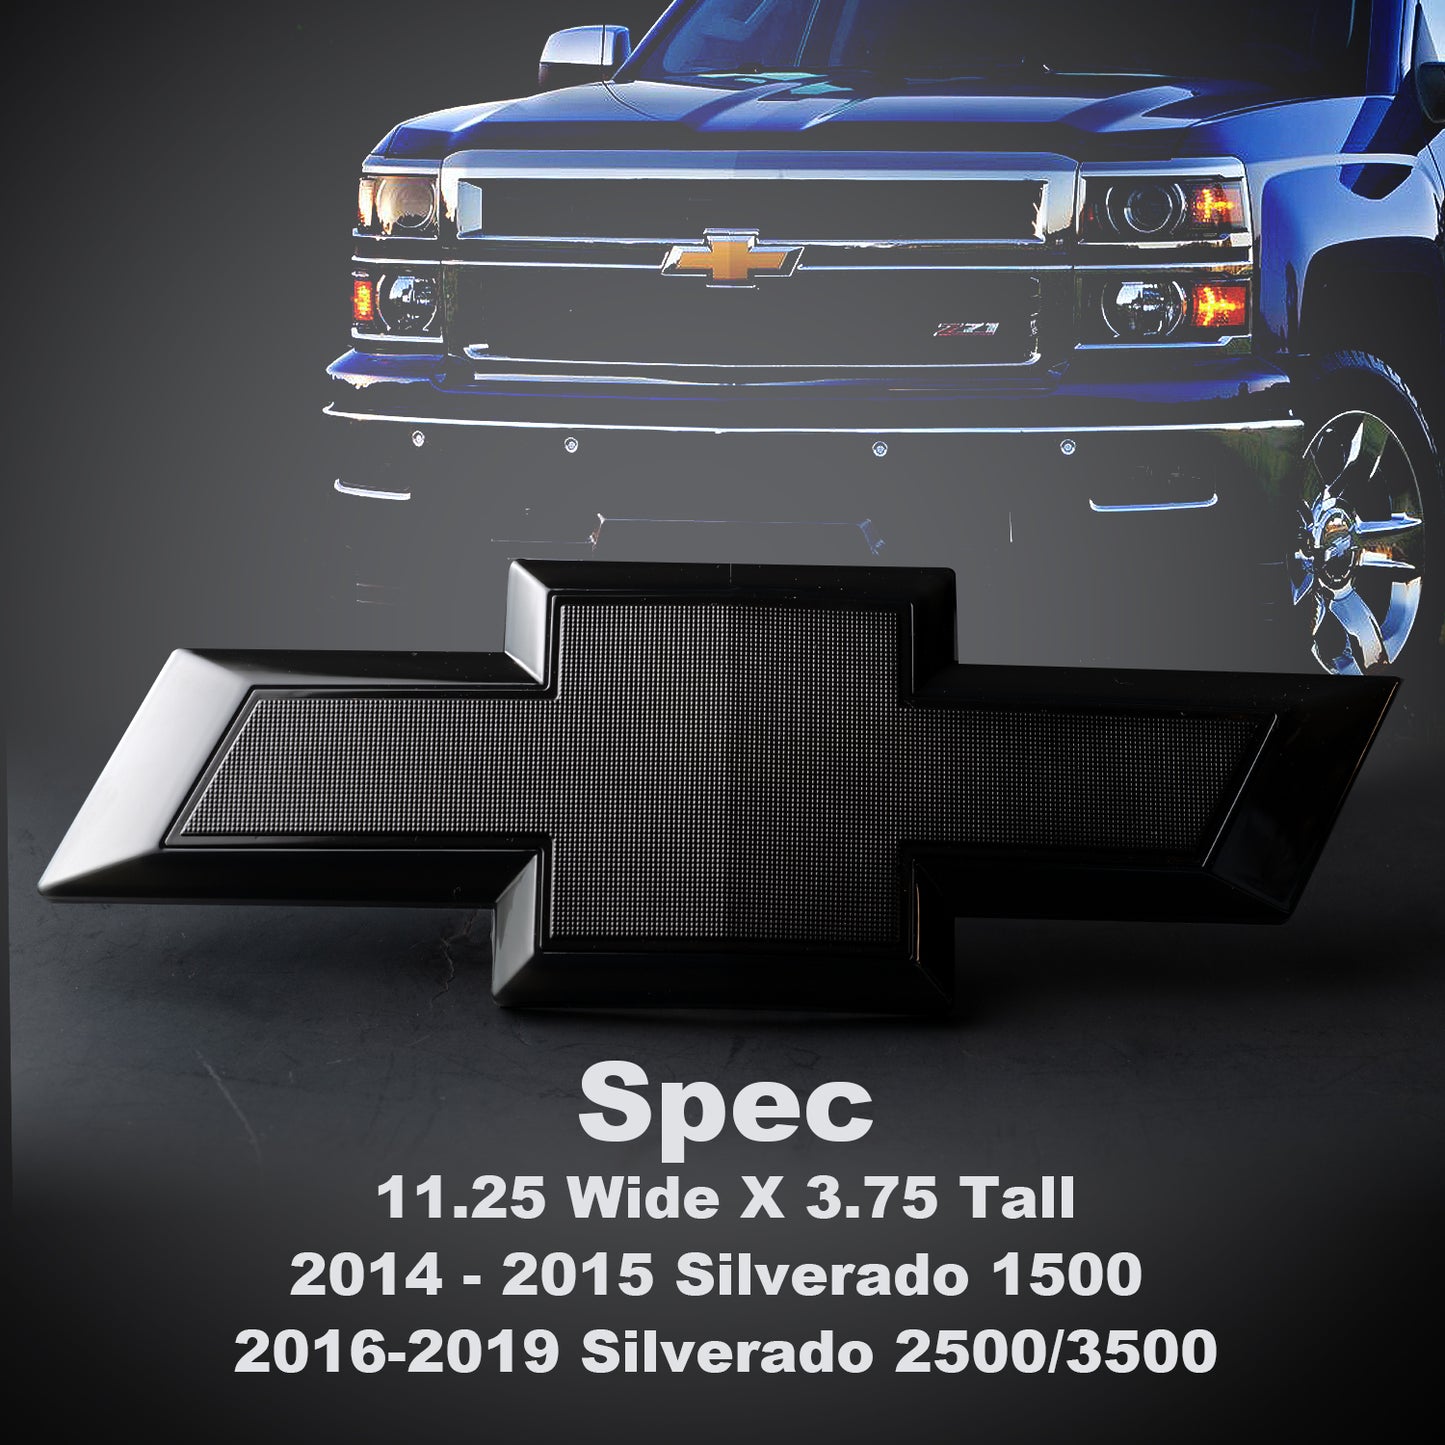 LED Lighted Chevy Silverado Grille Emblem 2014-15 1500 | 2016-19 2500/3500